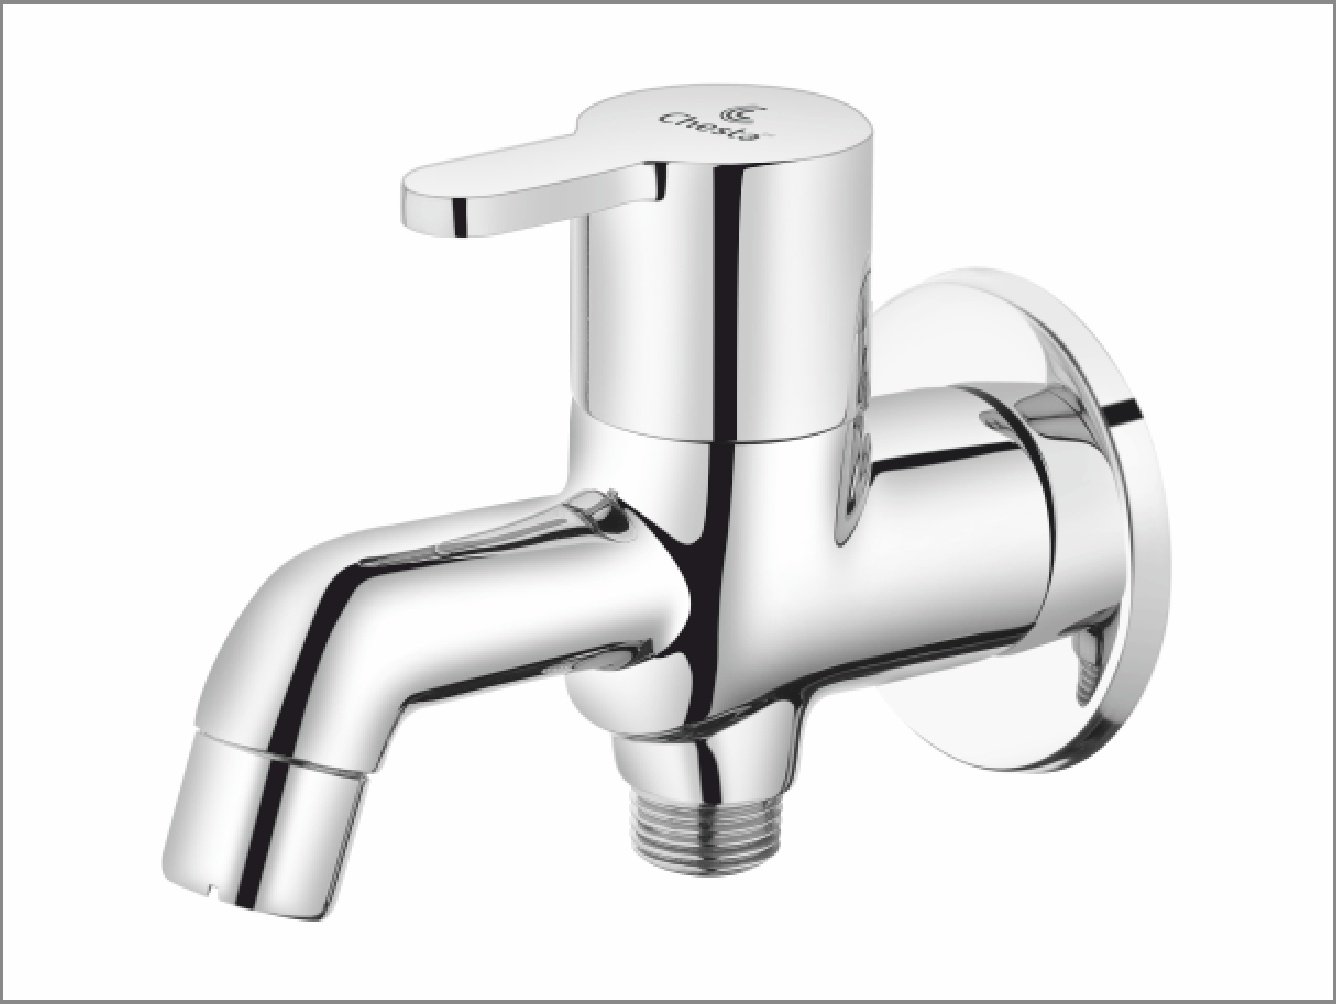 AK - 1005 - 2 in 1 Bib Cock with Wall Flange at Chesta Bath Fitting